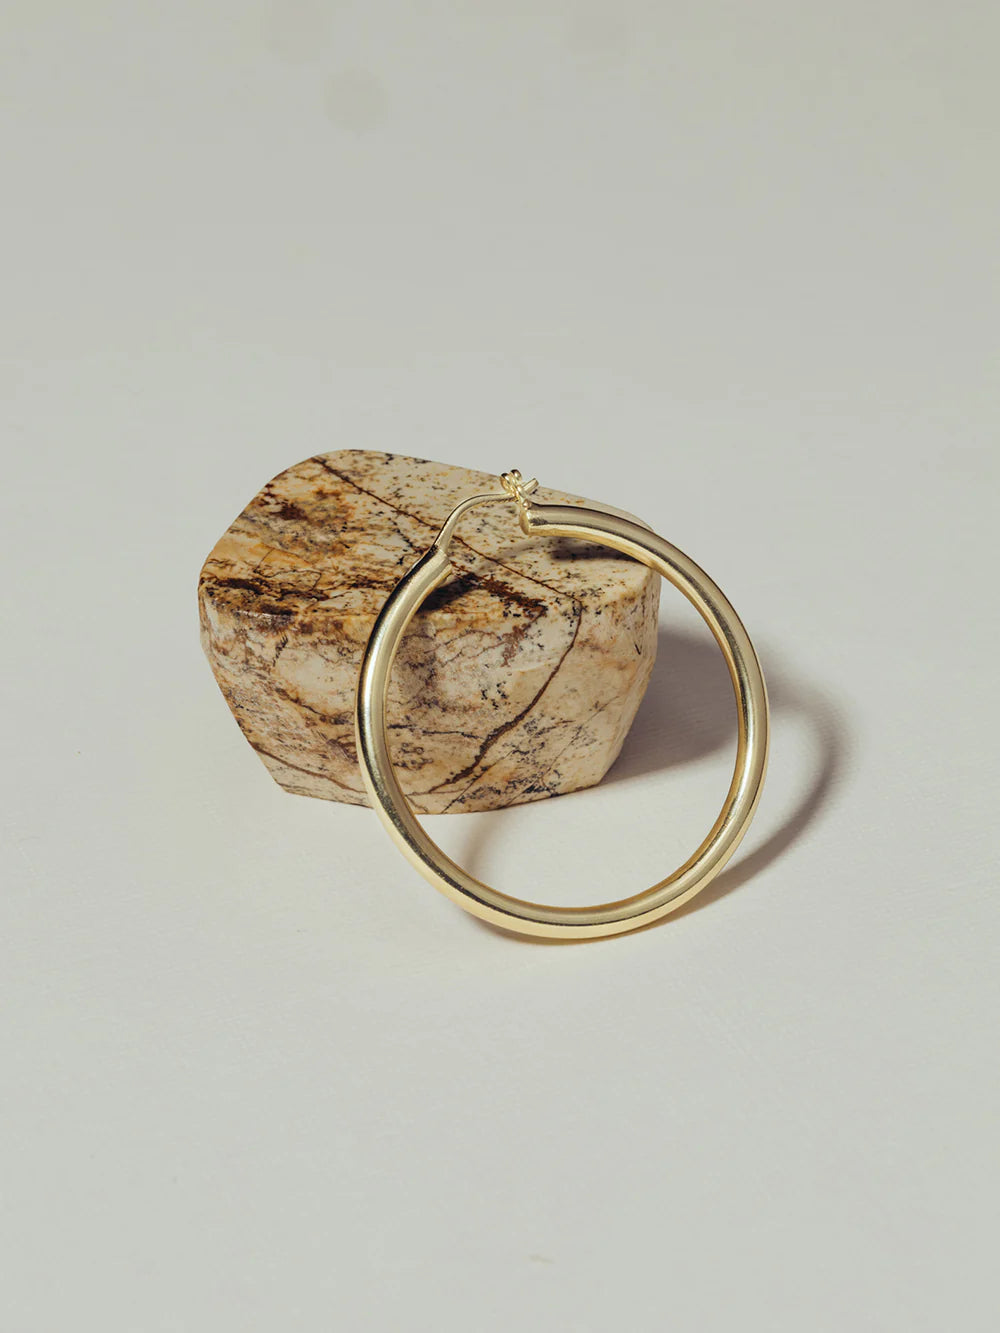 BETTER YOU Earring | Goldplated